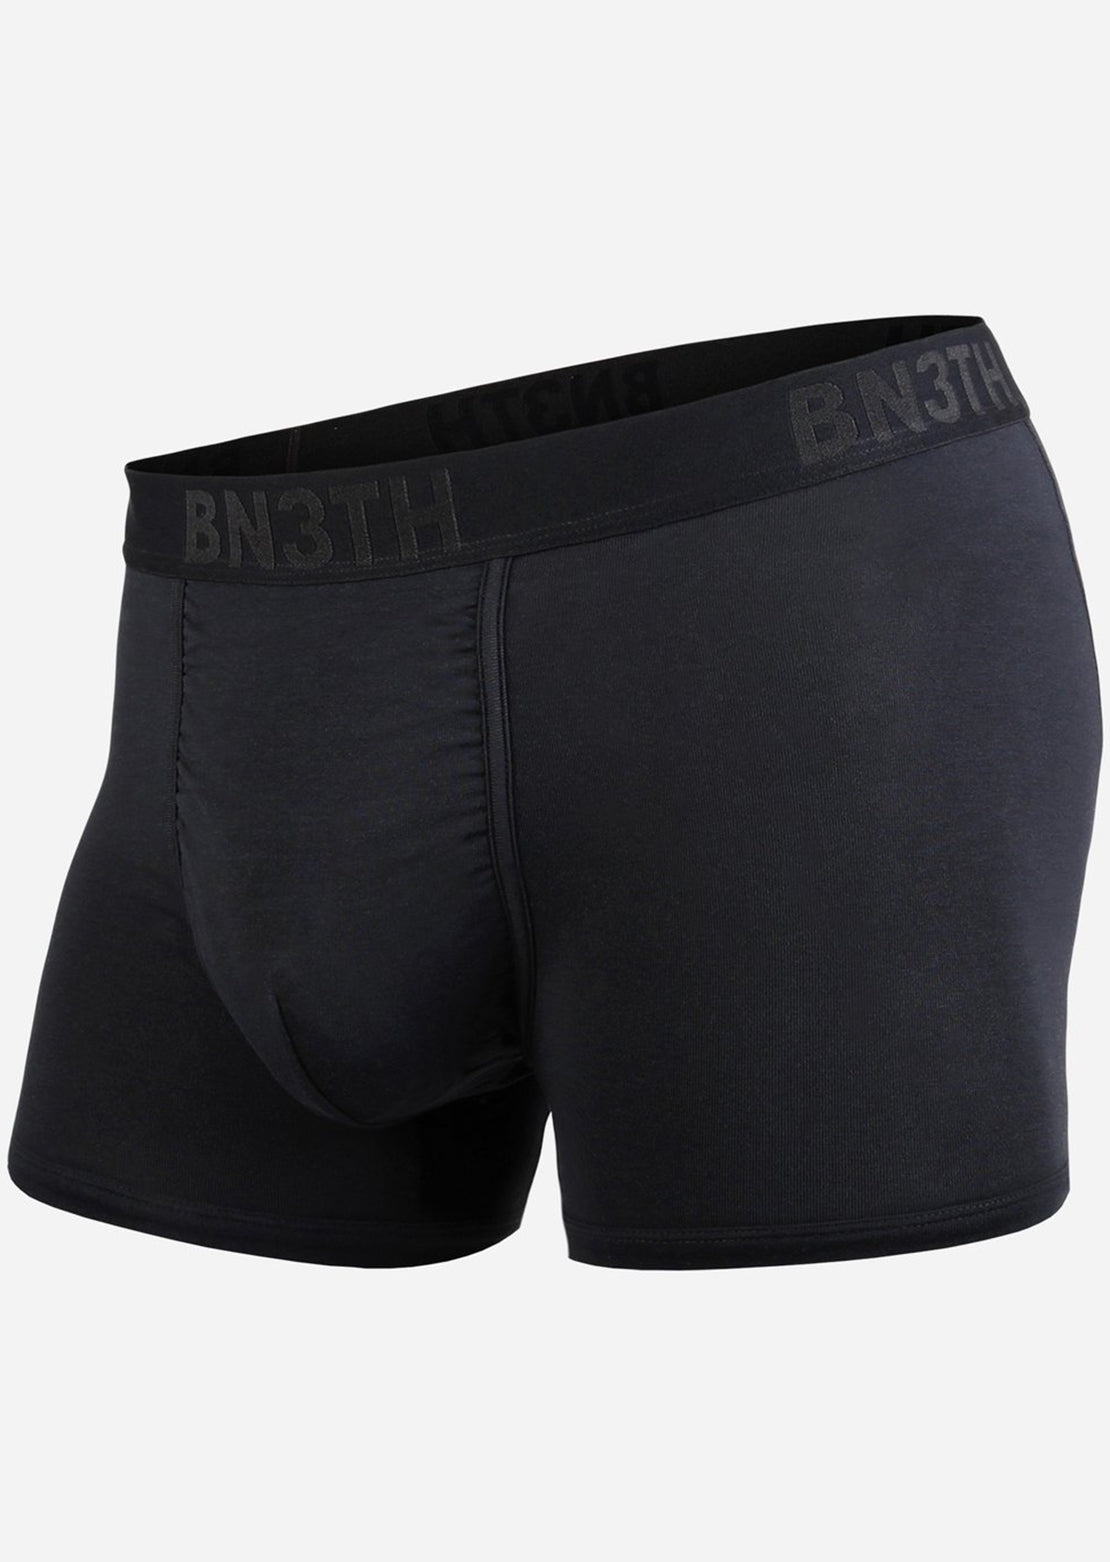 BN3TH Men&#39;s Classic Trunk Solid Boxers Black